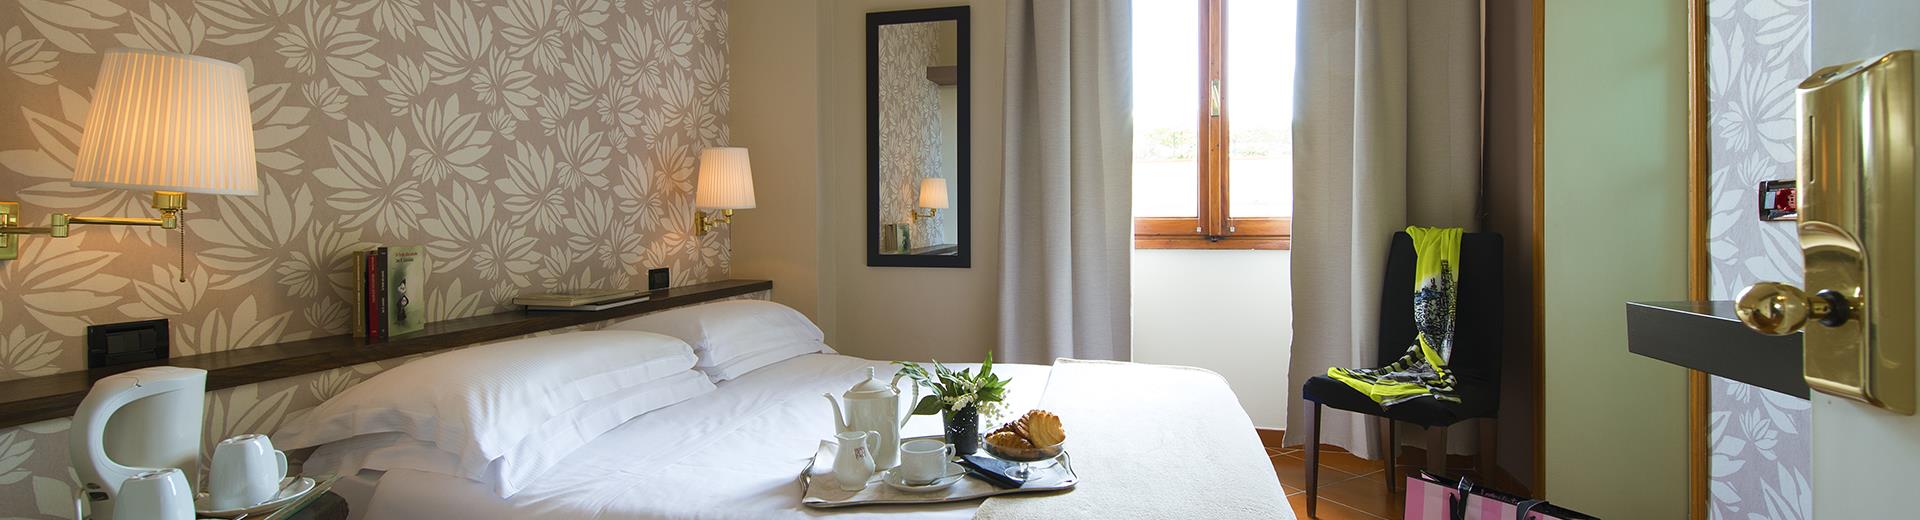 If you are looking for a hotel in the Centre of Florence and travelling alone, book a single room at Hotel De La Pace: 12 sqm and all amenities like free Wi-Fi and parking!